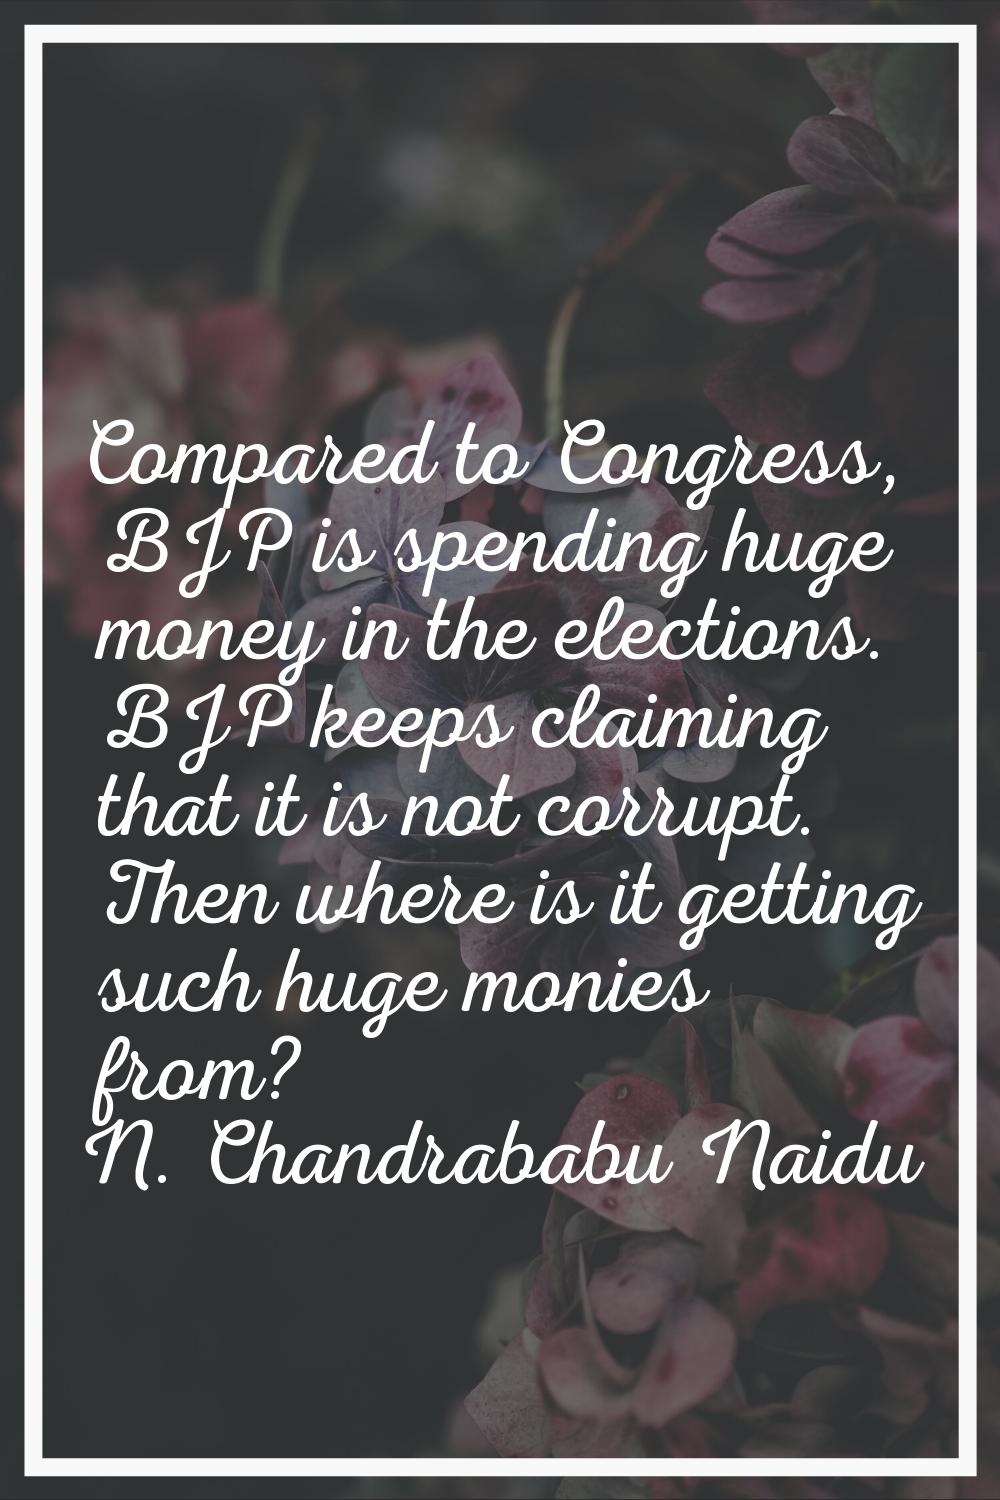 Compared to Congress, BJP is spending huge money in the elections. BJP keeps claiming that it is no